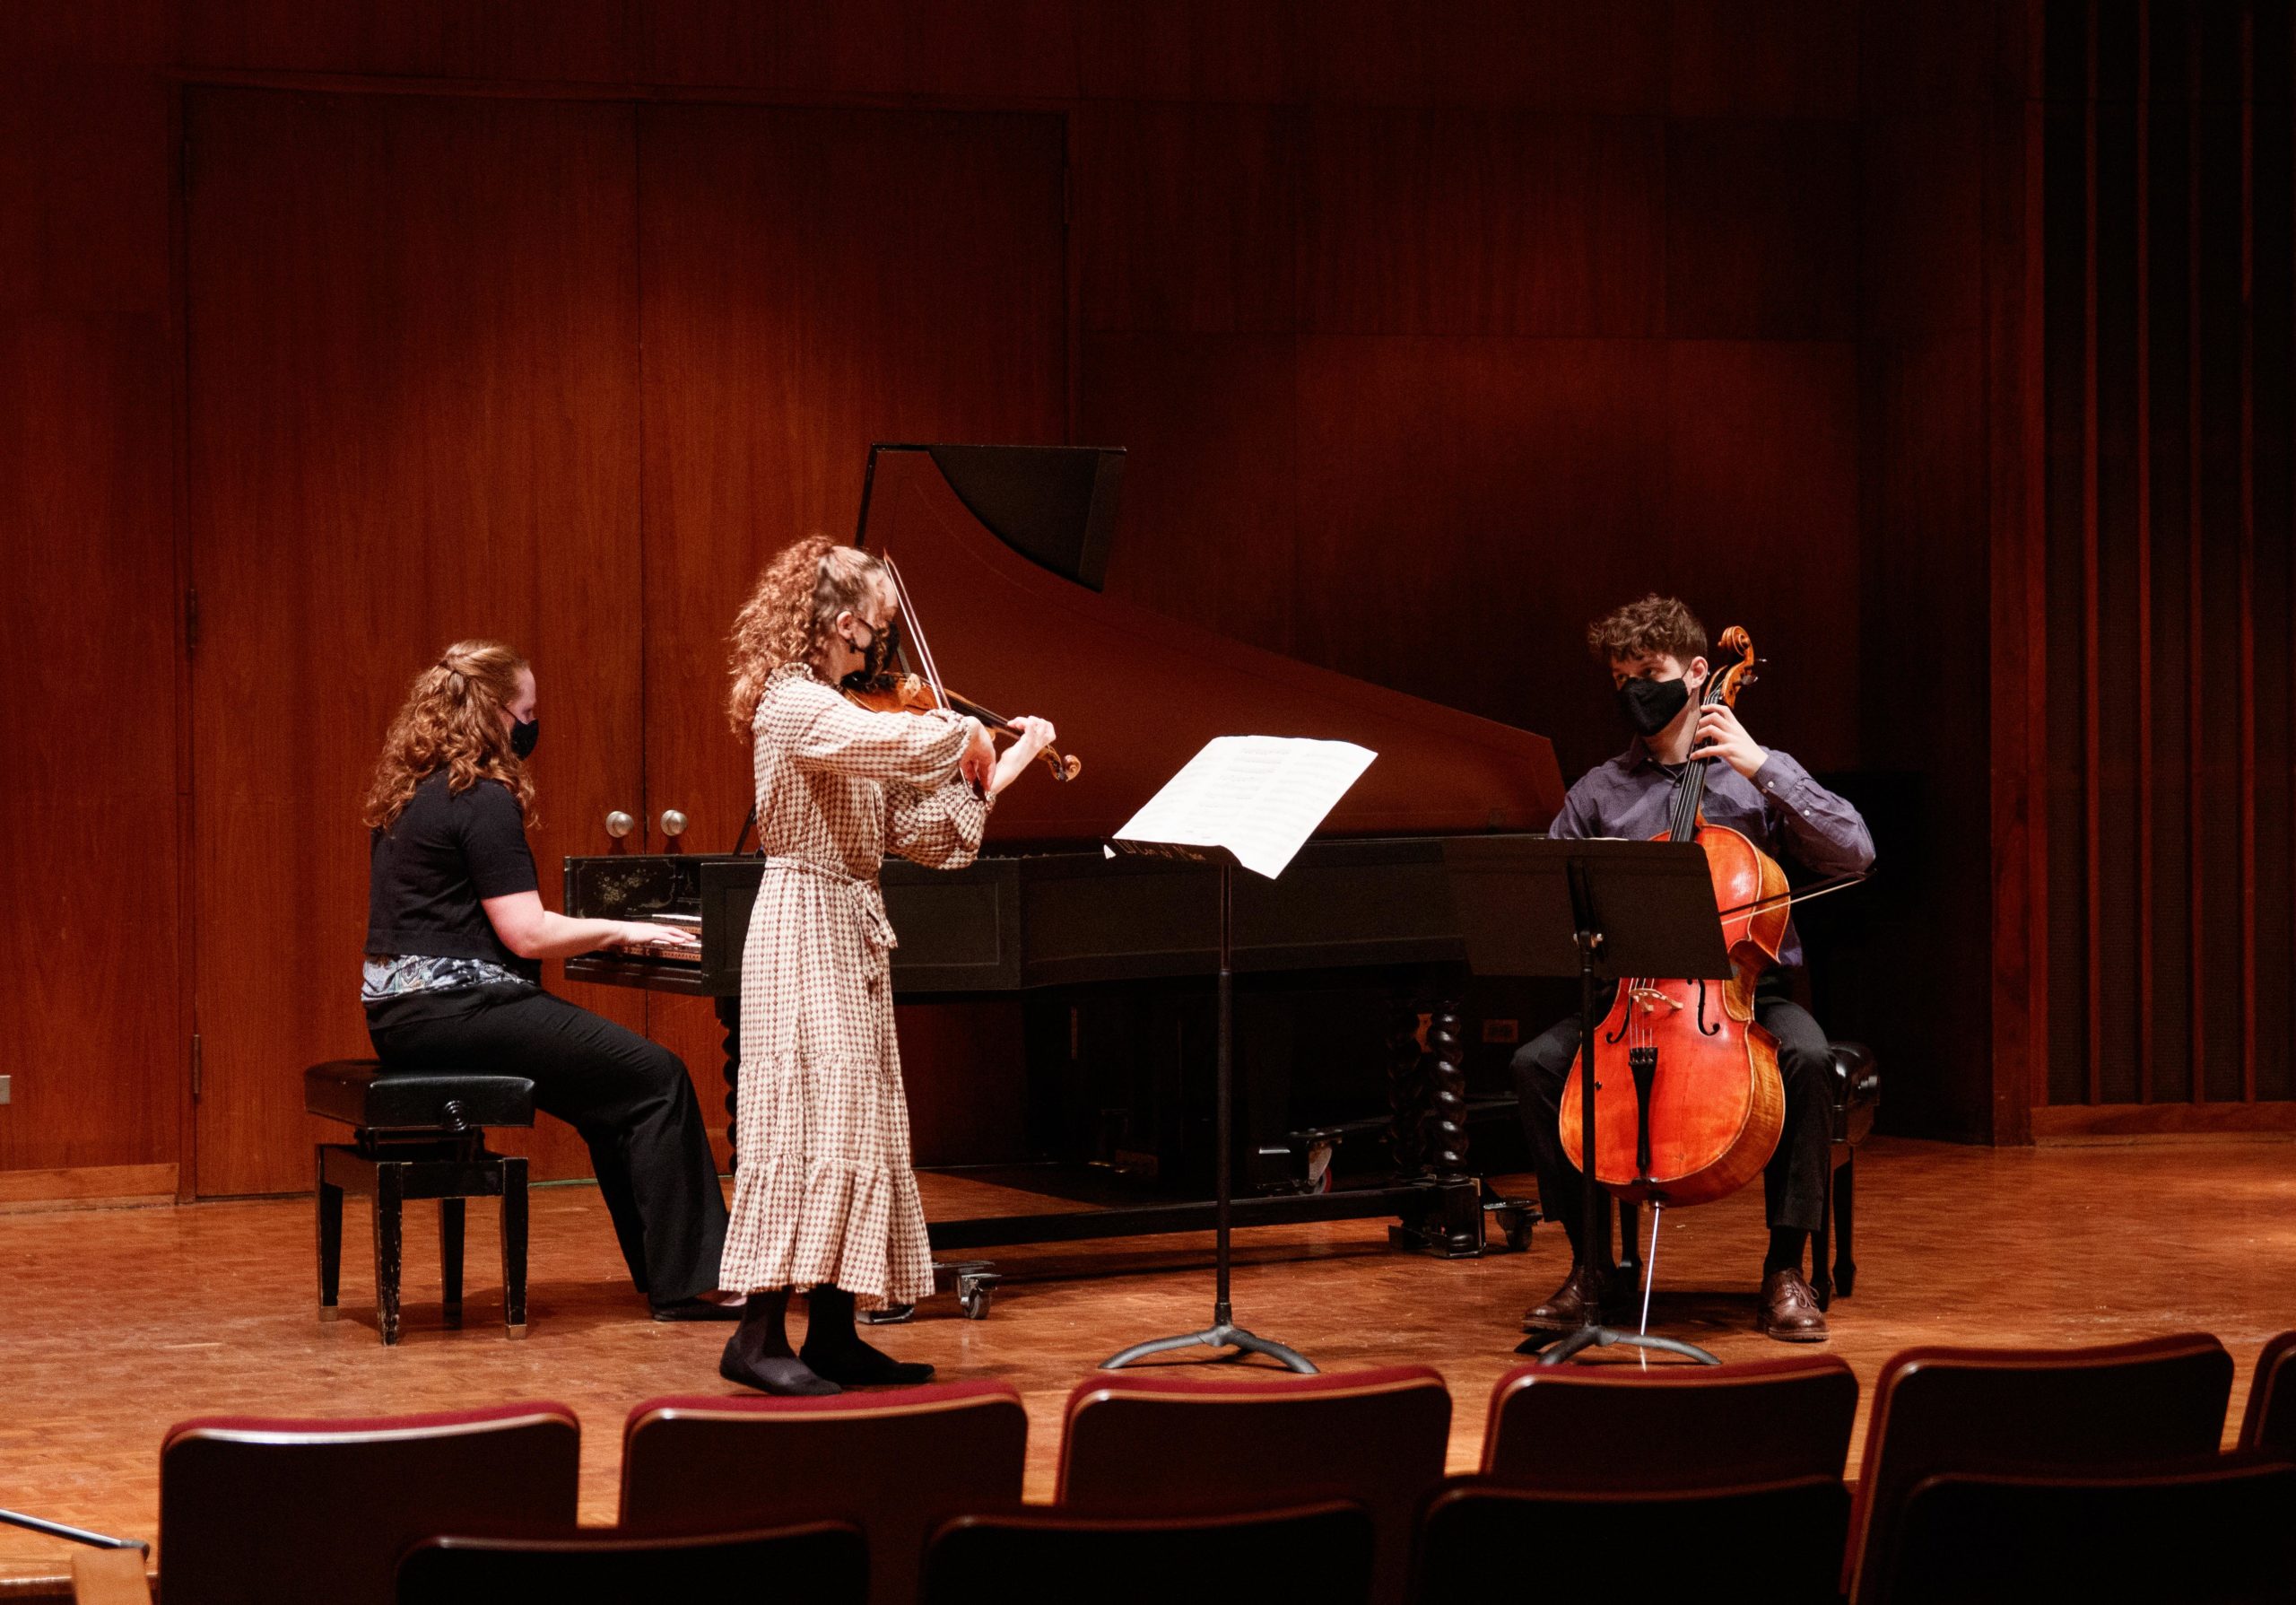 A pianist, violinist, and cellist play together masked on a stage.